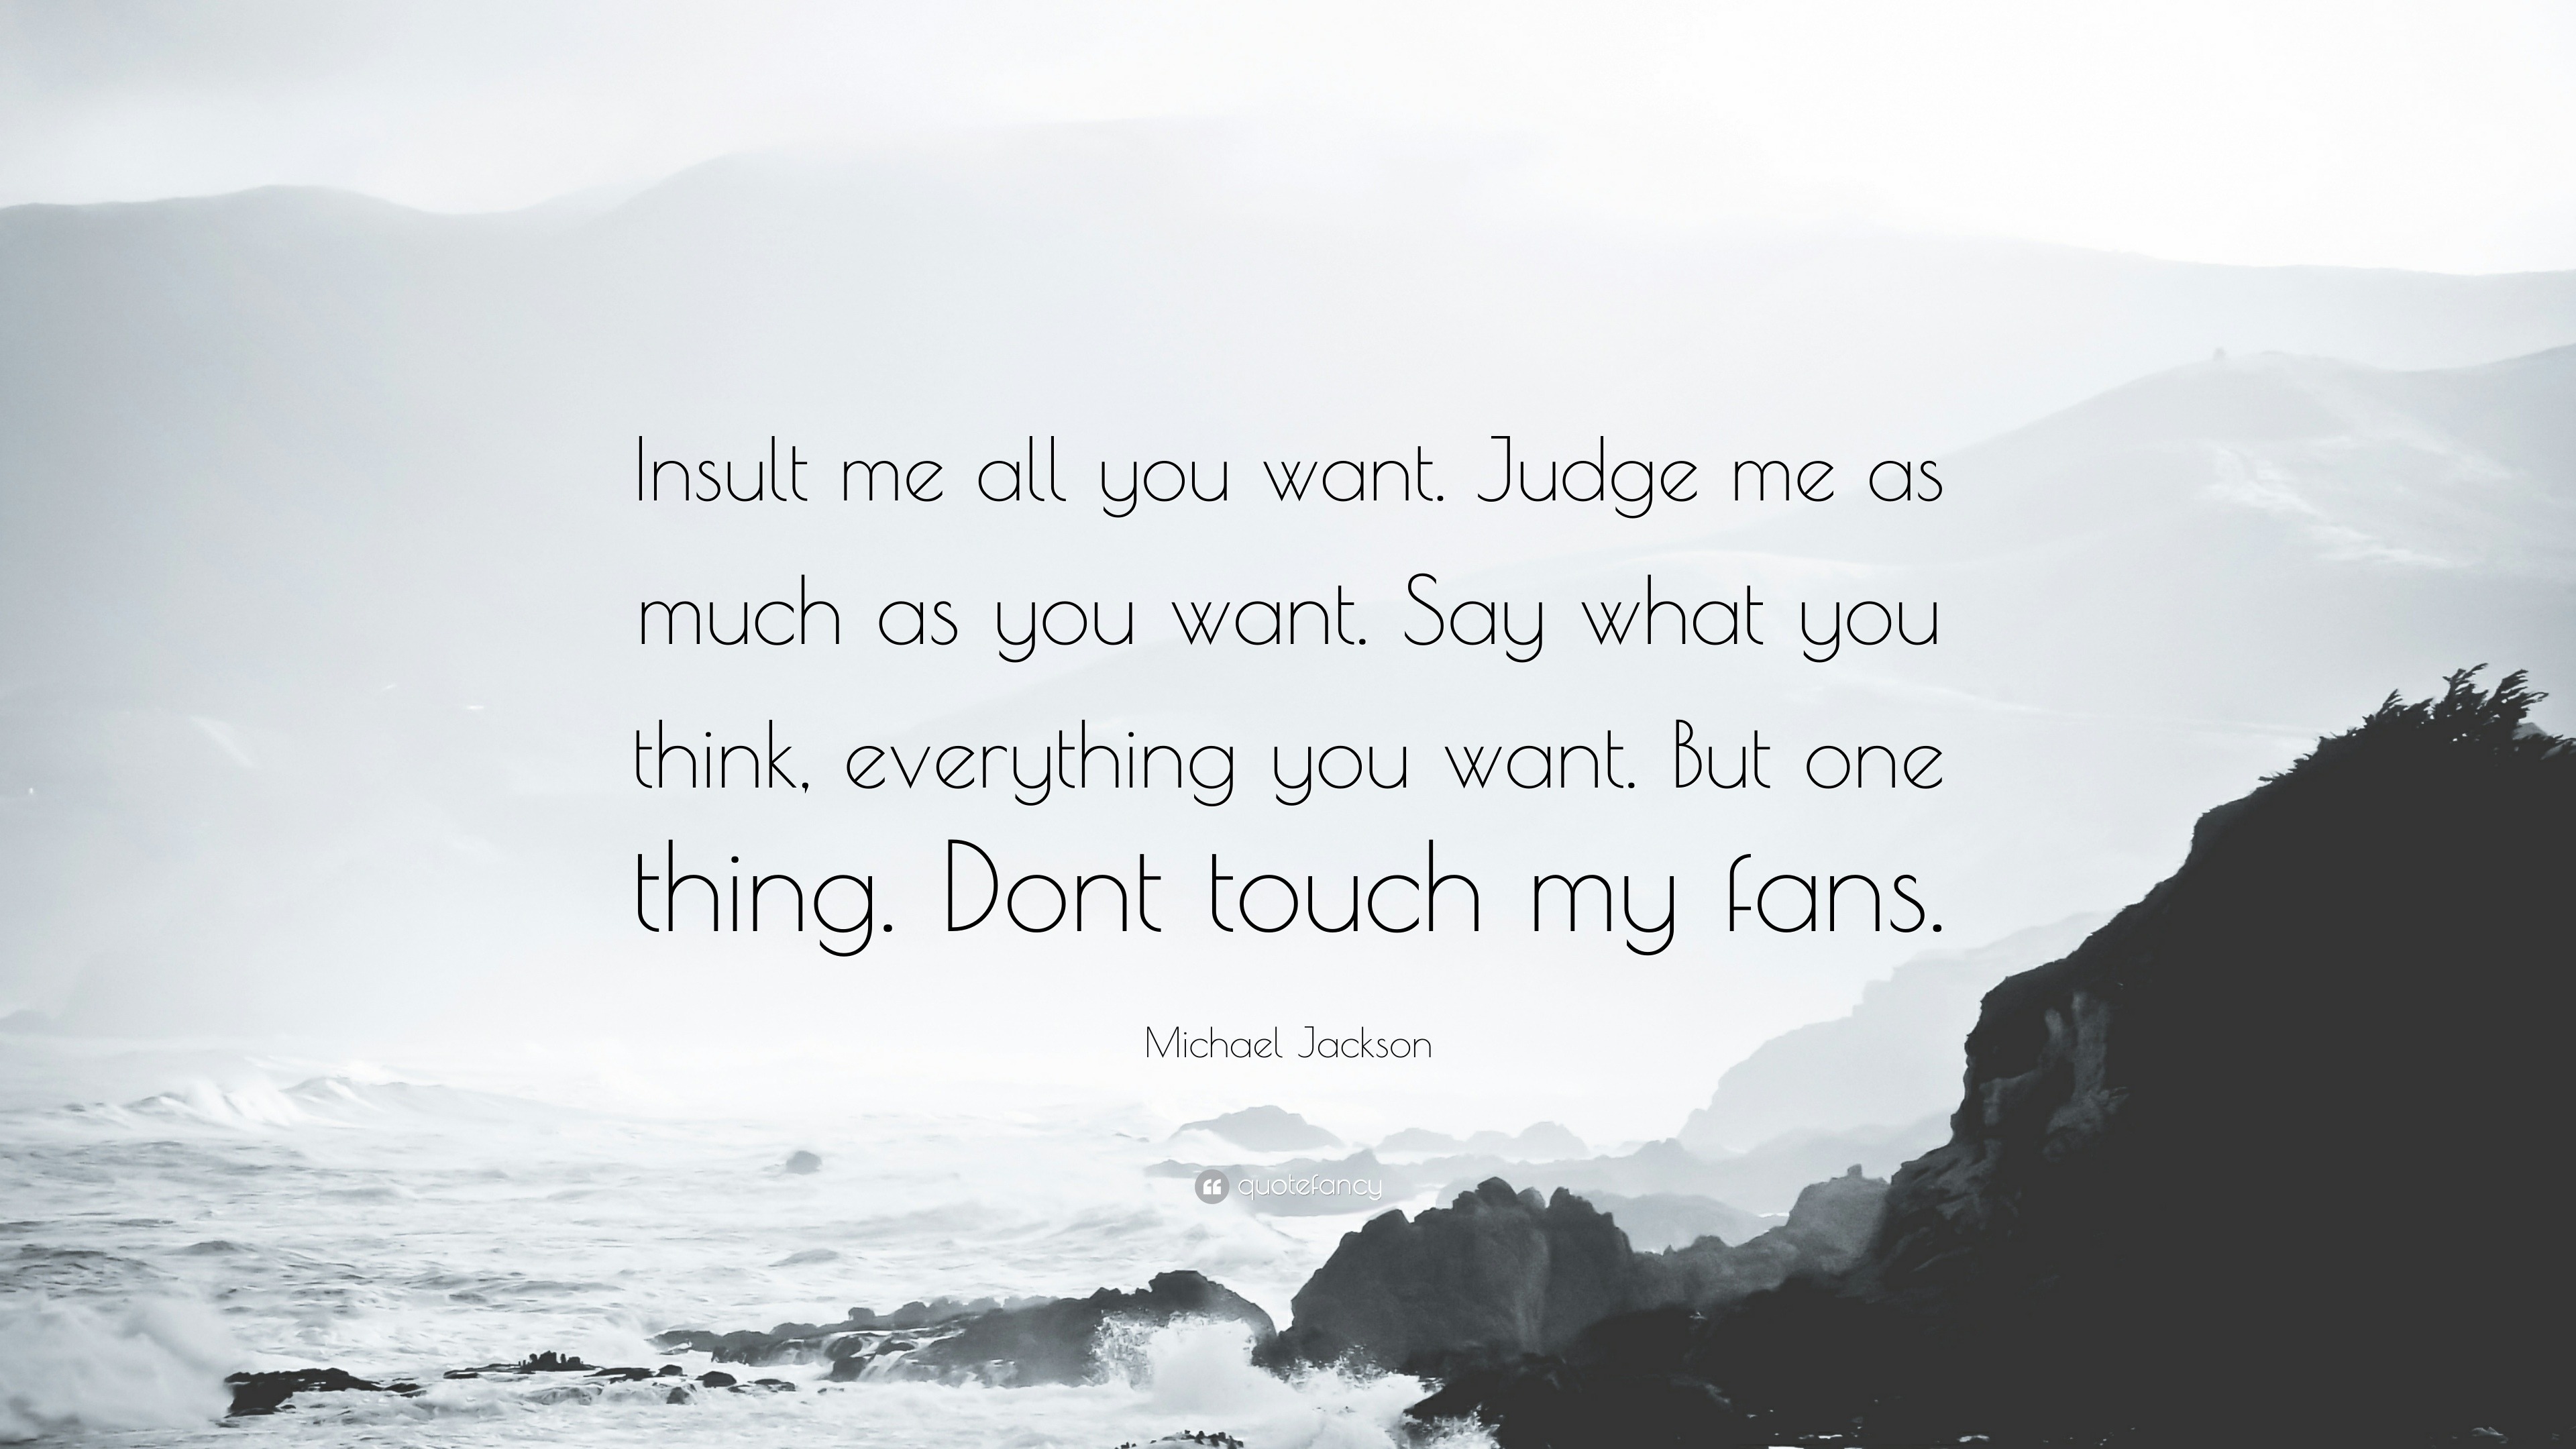 Michael Jackson Quote: “Insult Me All You Want. Judge Me As Much As You Want. Say What You Think, Everything You Want. But One Thing. Dont Touch...”